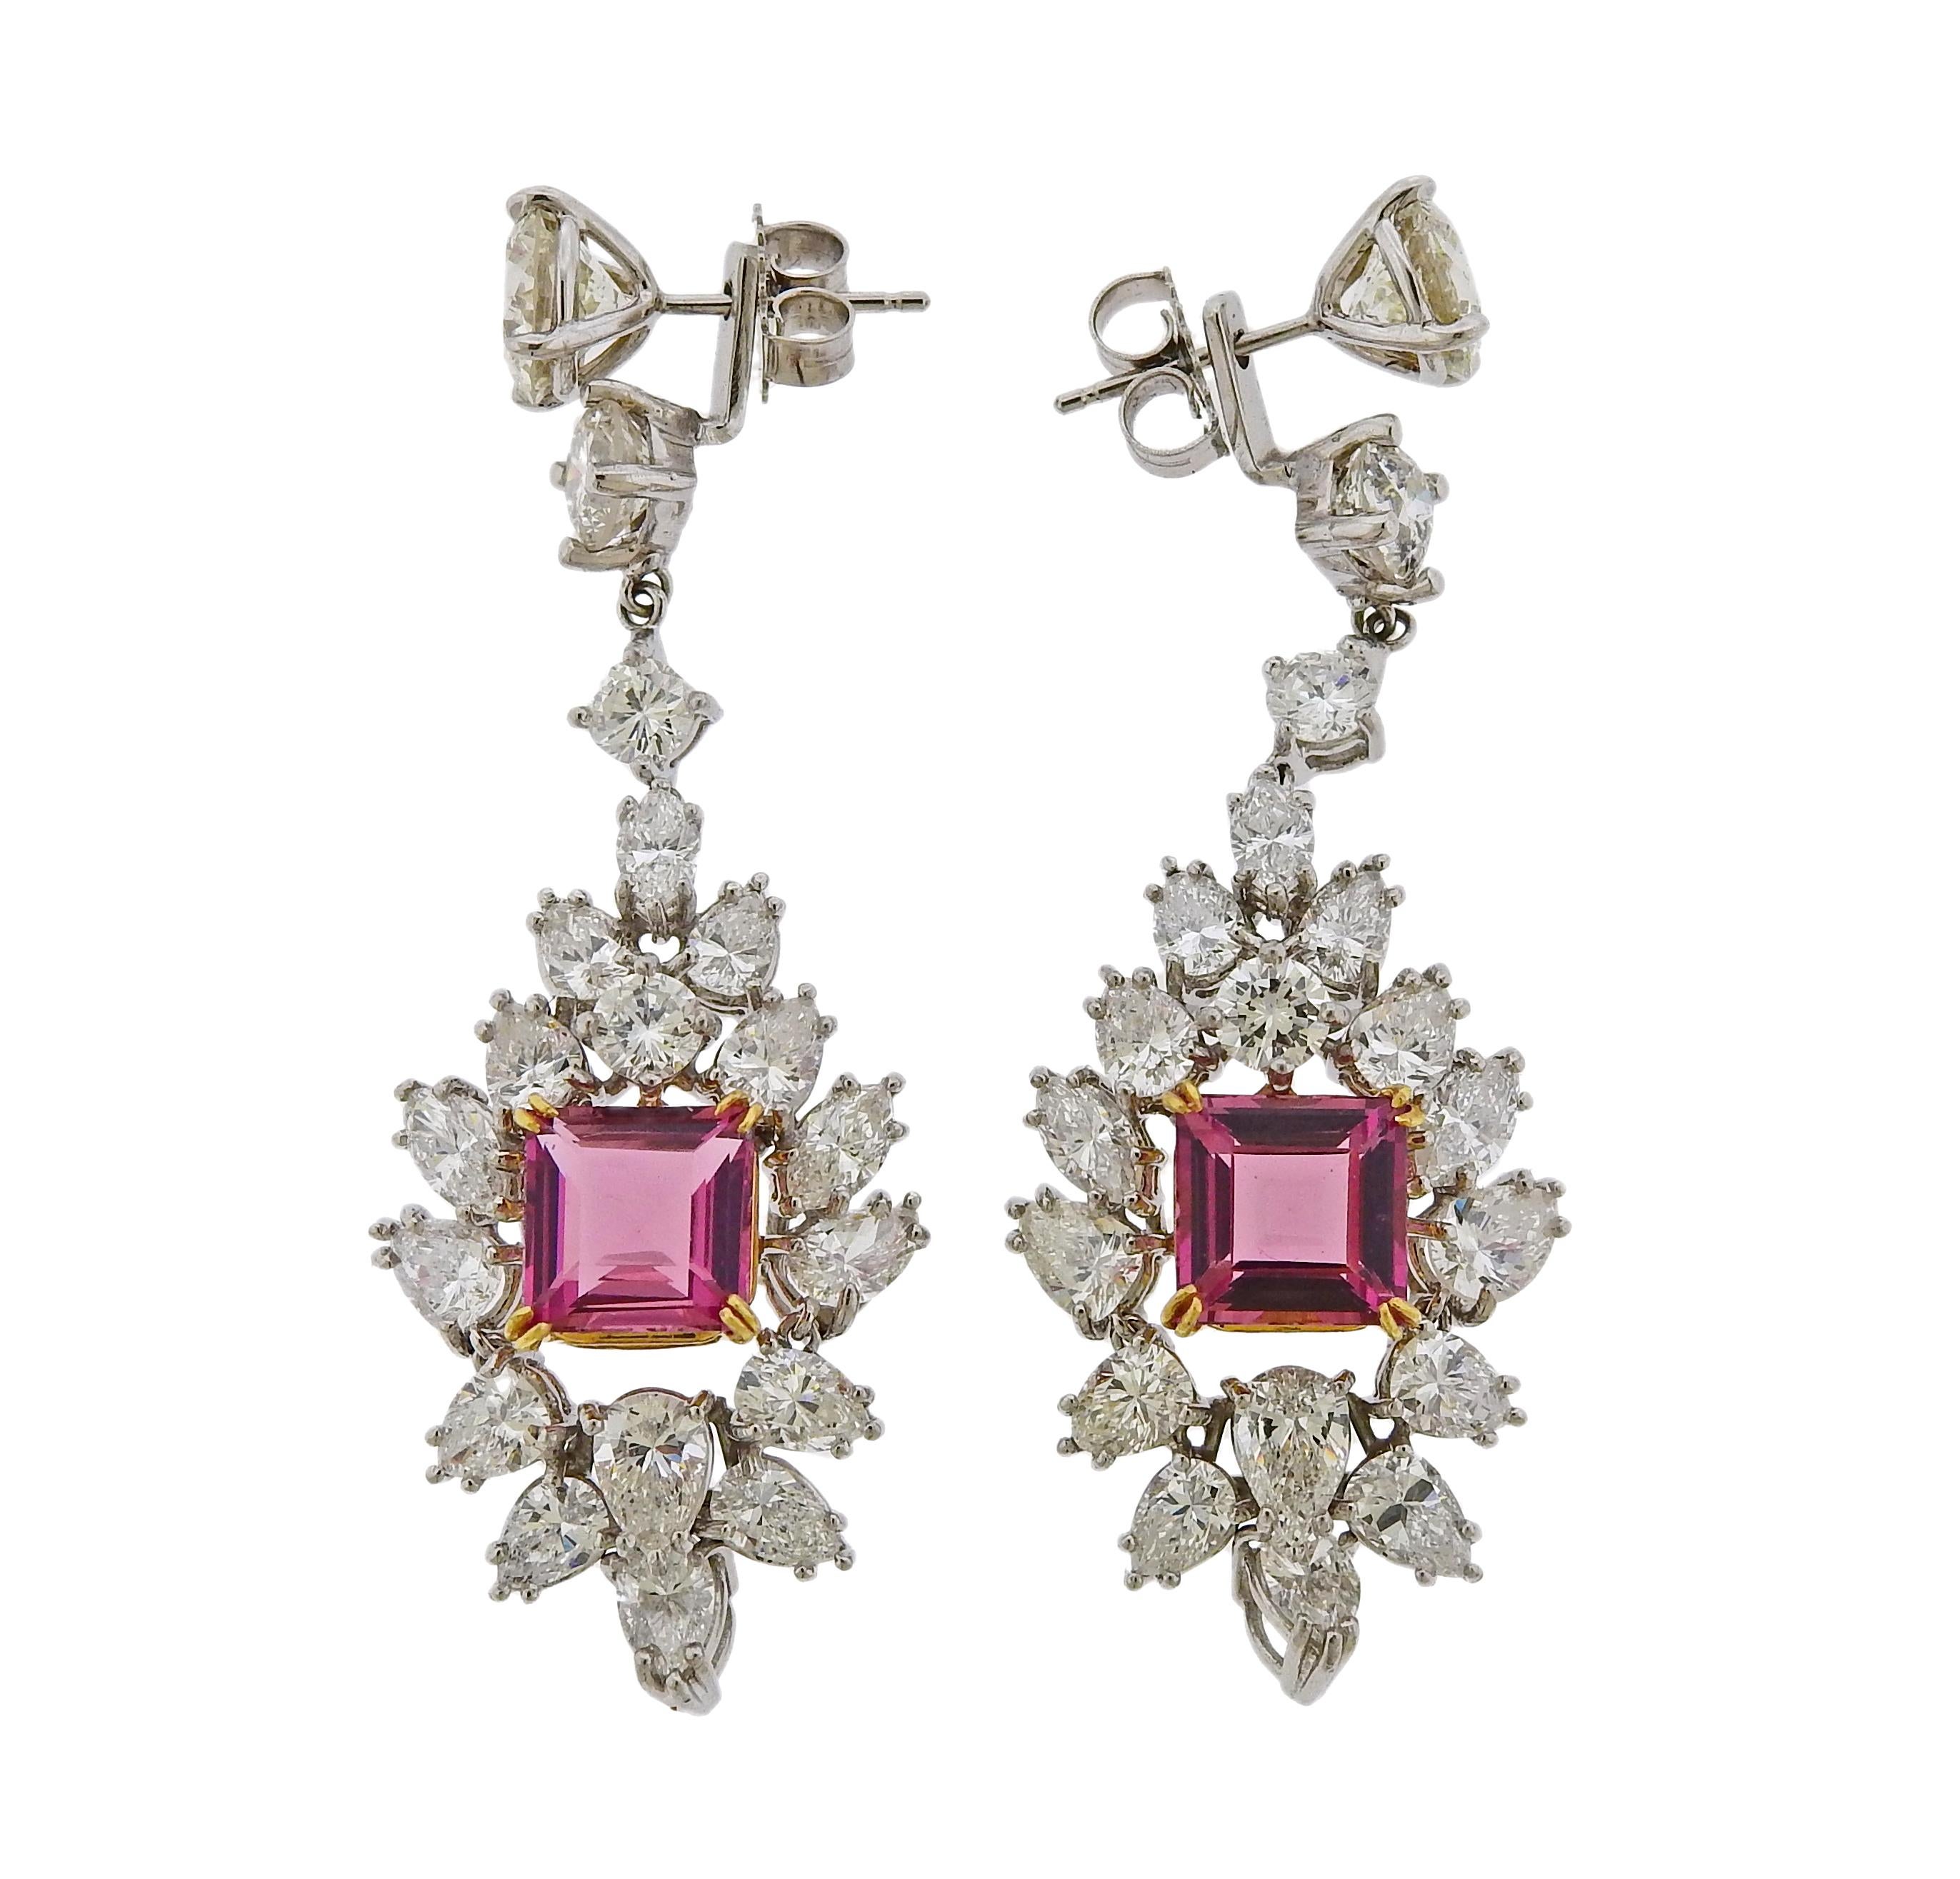 Pair of exquisite platinum long drop earrings, convertible to studs. The earrings are set with a total of approx. 9.50ctw in diamonds (two largest stud diamonds are approx. 2.10ctw) and two square cut pink tourmaline - approx. 3.35ctw, set in 18k